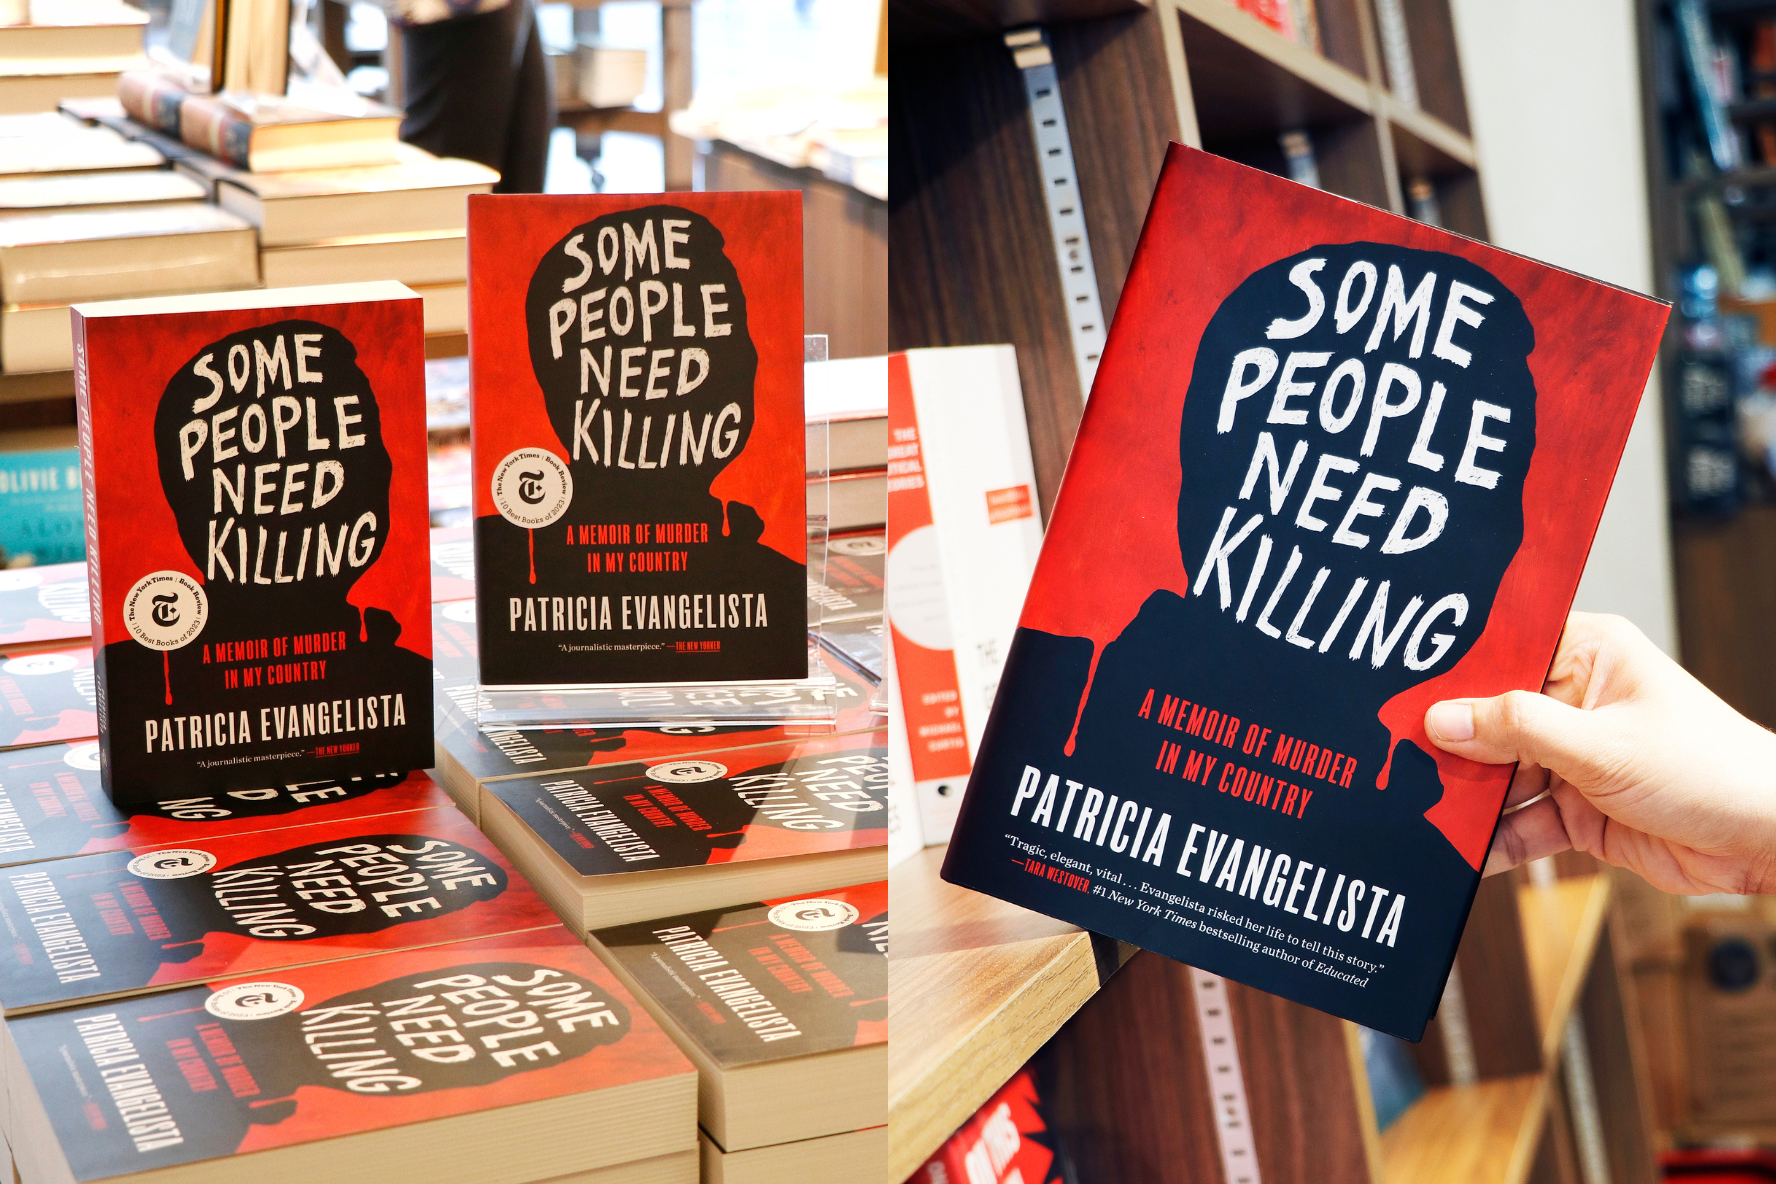 You Can Donate Copies of “Some People Need Killing” to Libraries—Here’s How